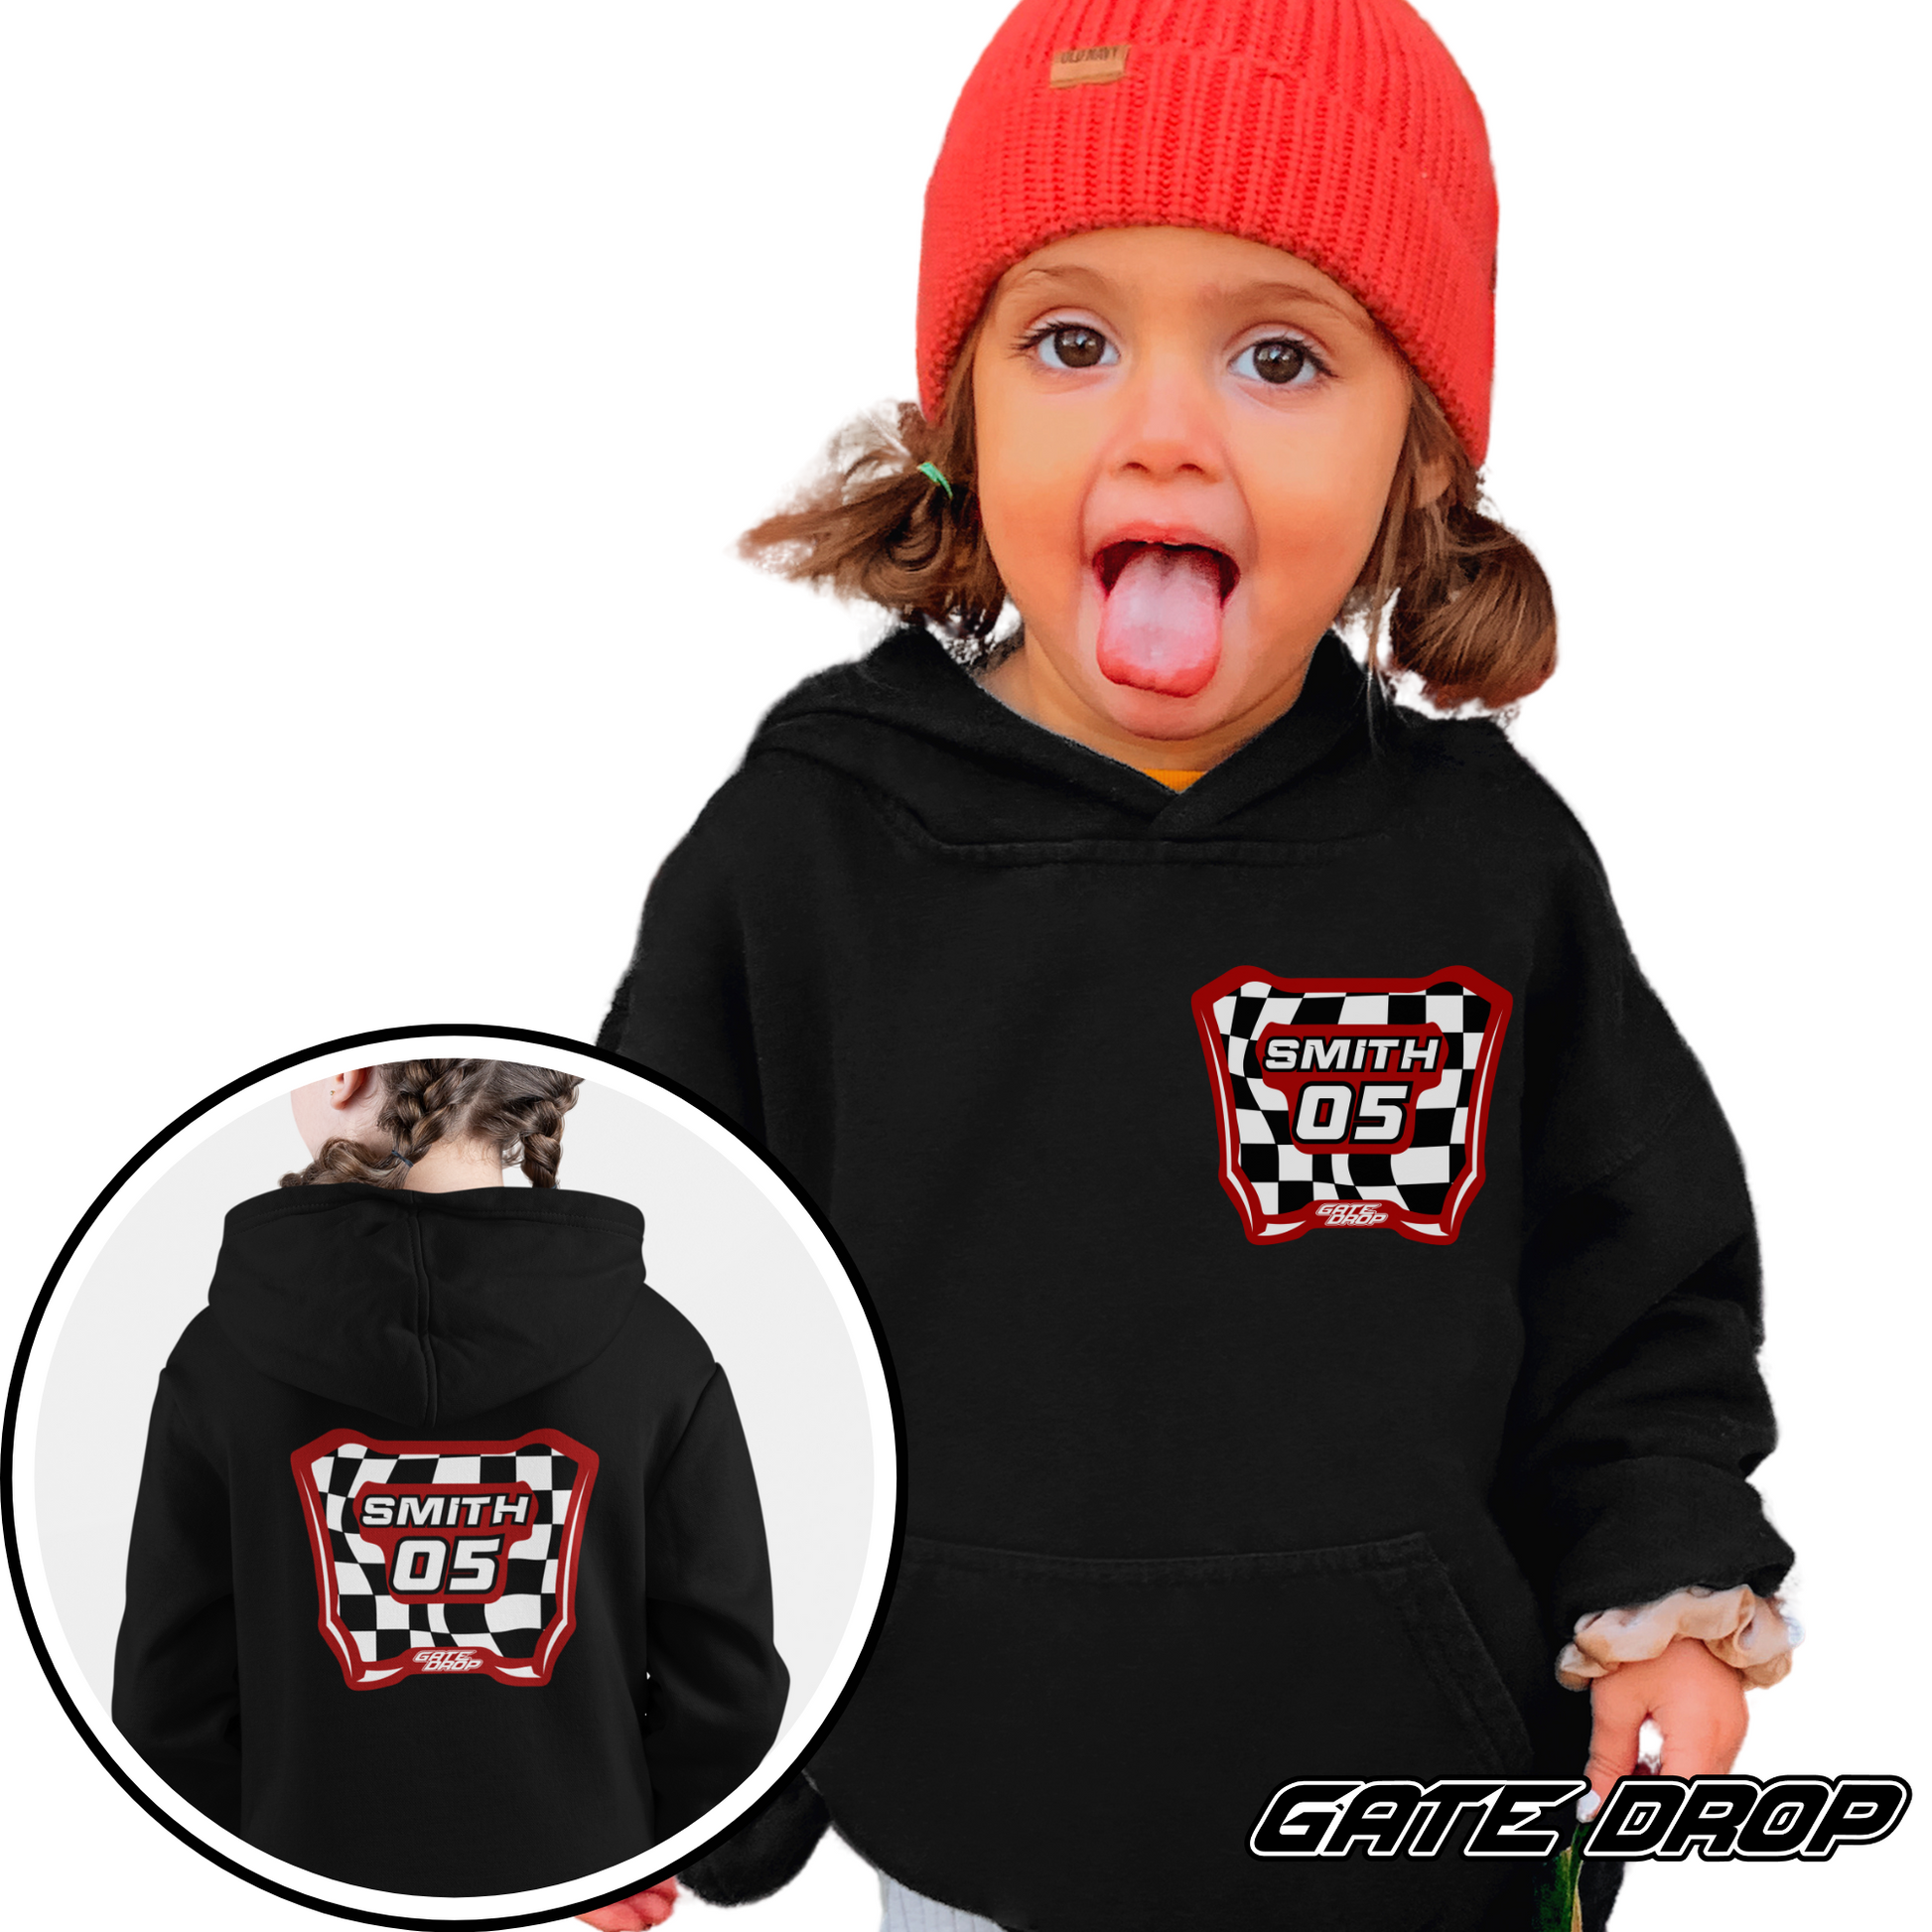 Gate Drop Motocross Checkered Plate with Custom Name and Number Youth Hoodie